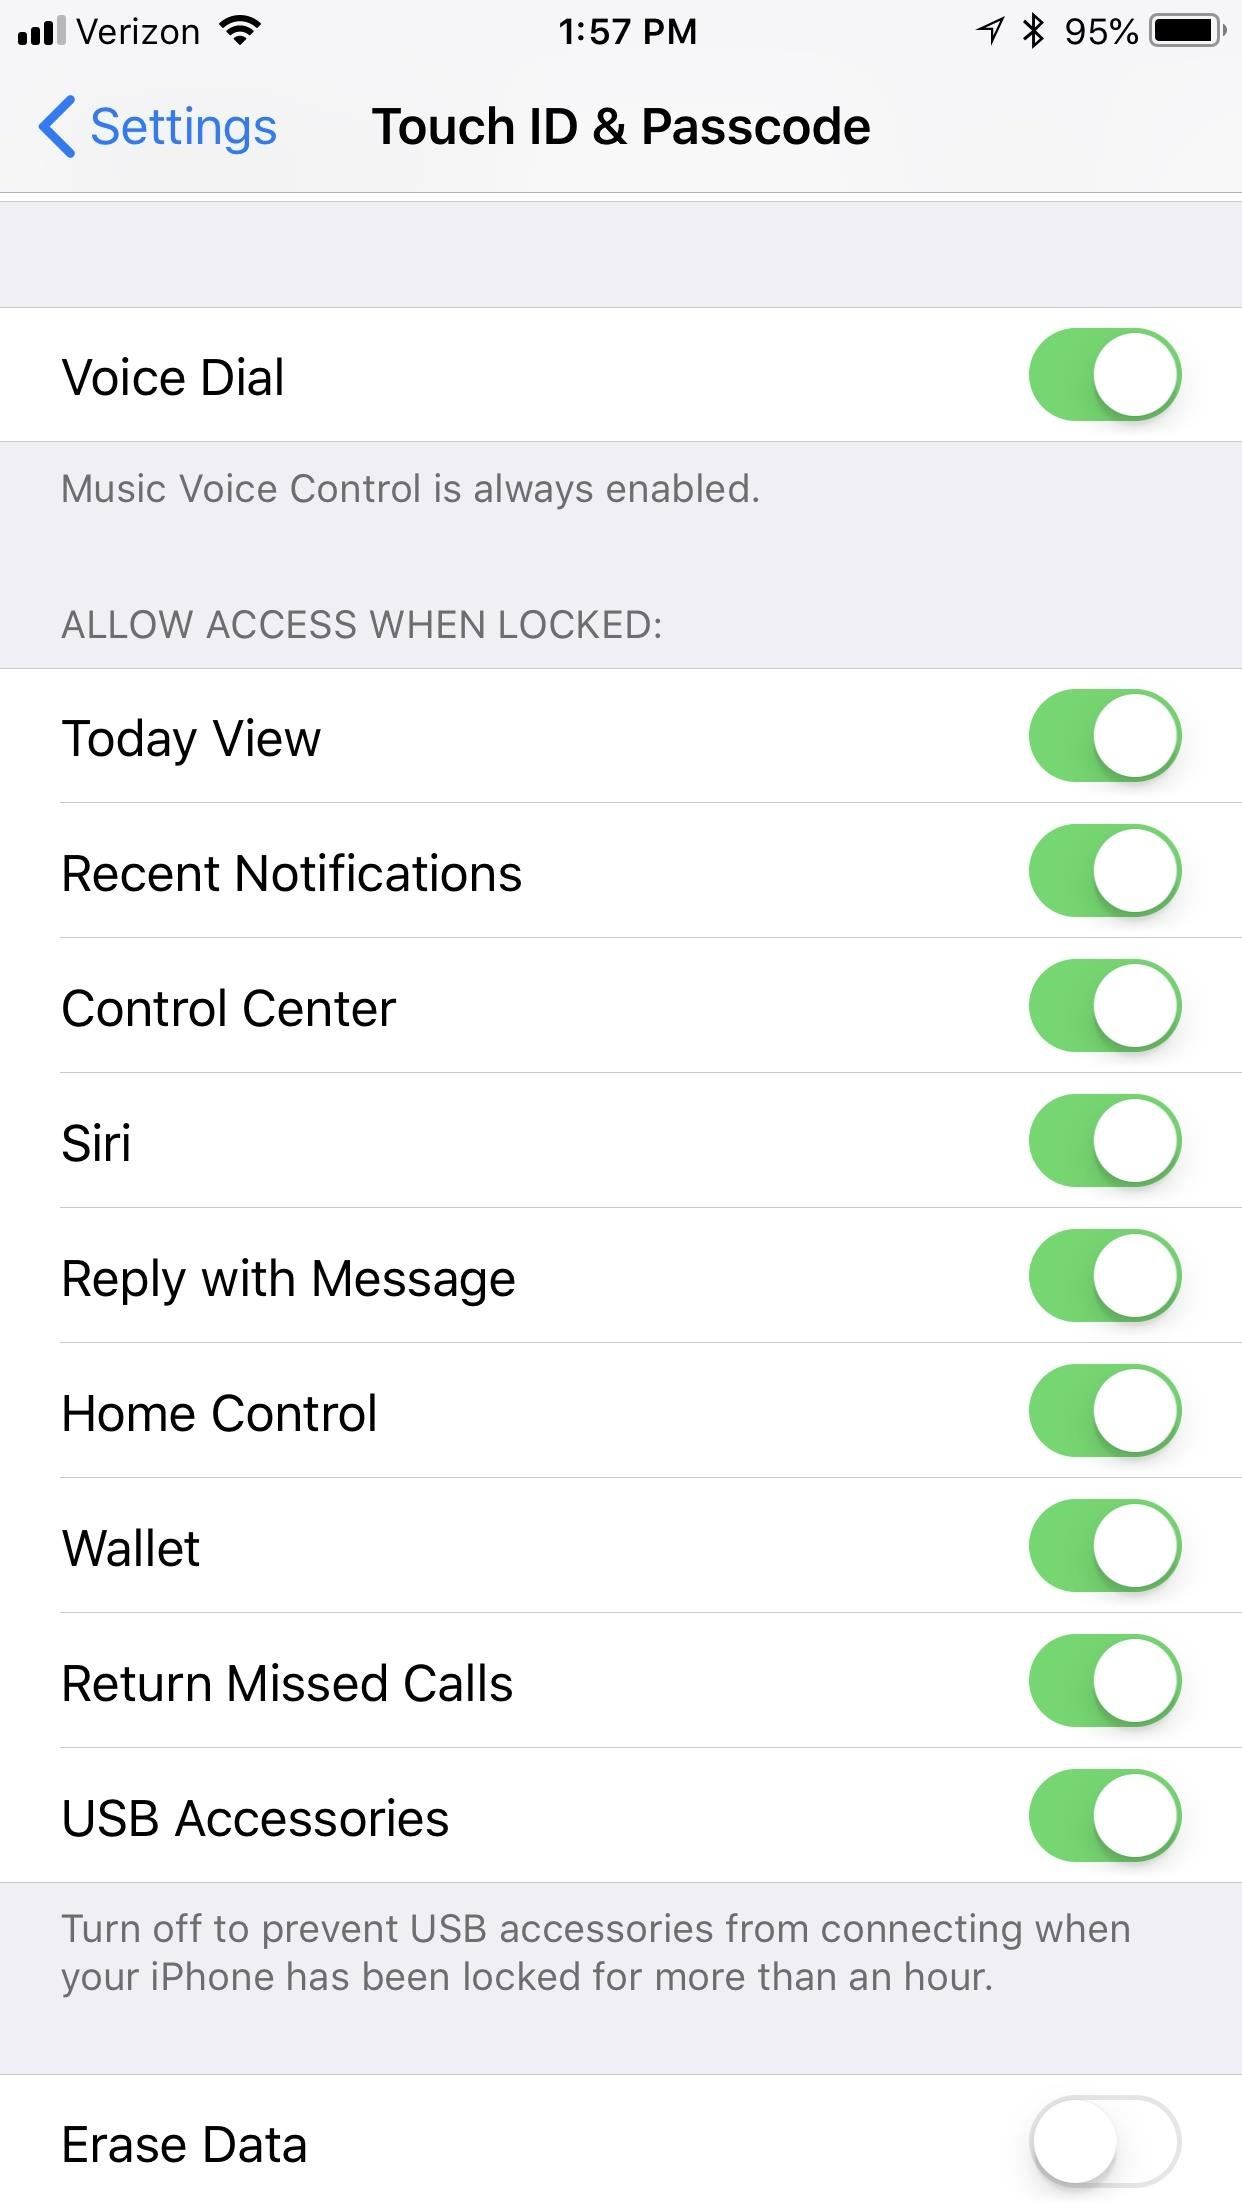 How to Disable the 'Unlock iPhone to Use Accessories' Notification in iOS 11.4.1 & Higher